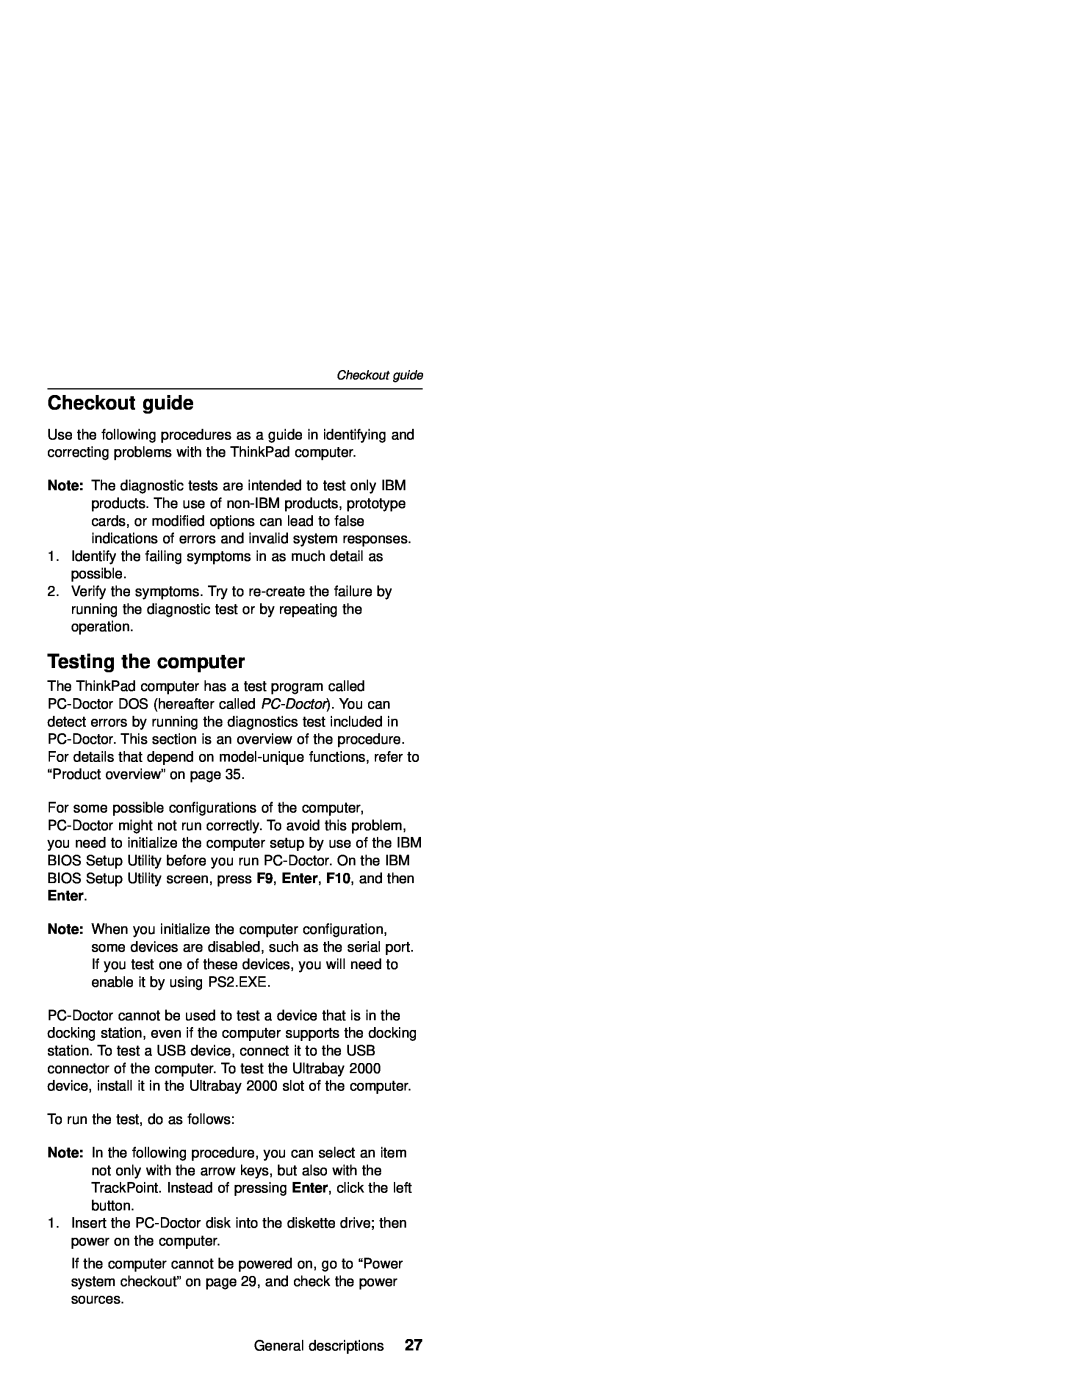 IBM MT 2632 manual Checkout guide, Testing the computer 